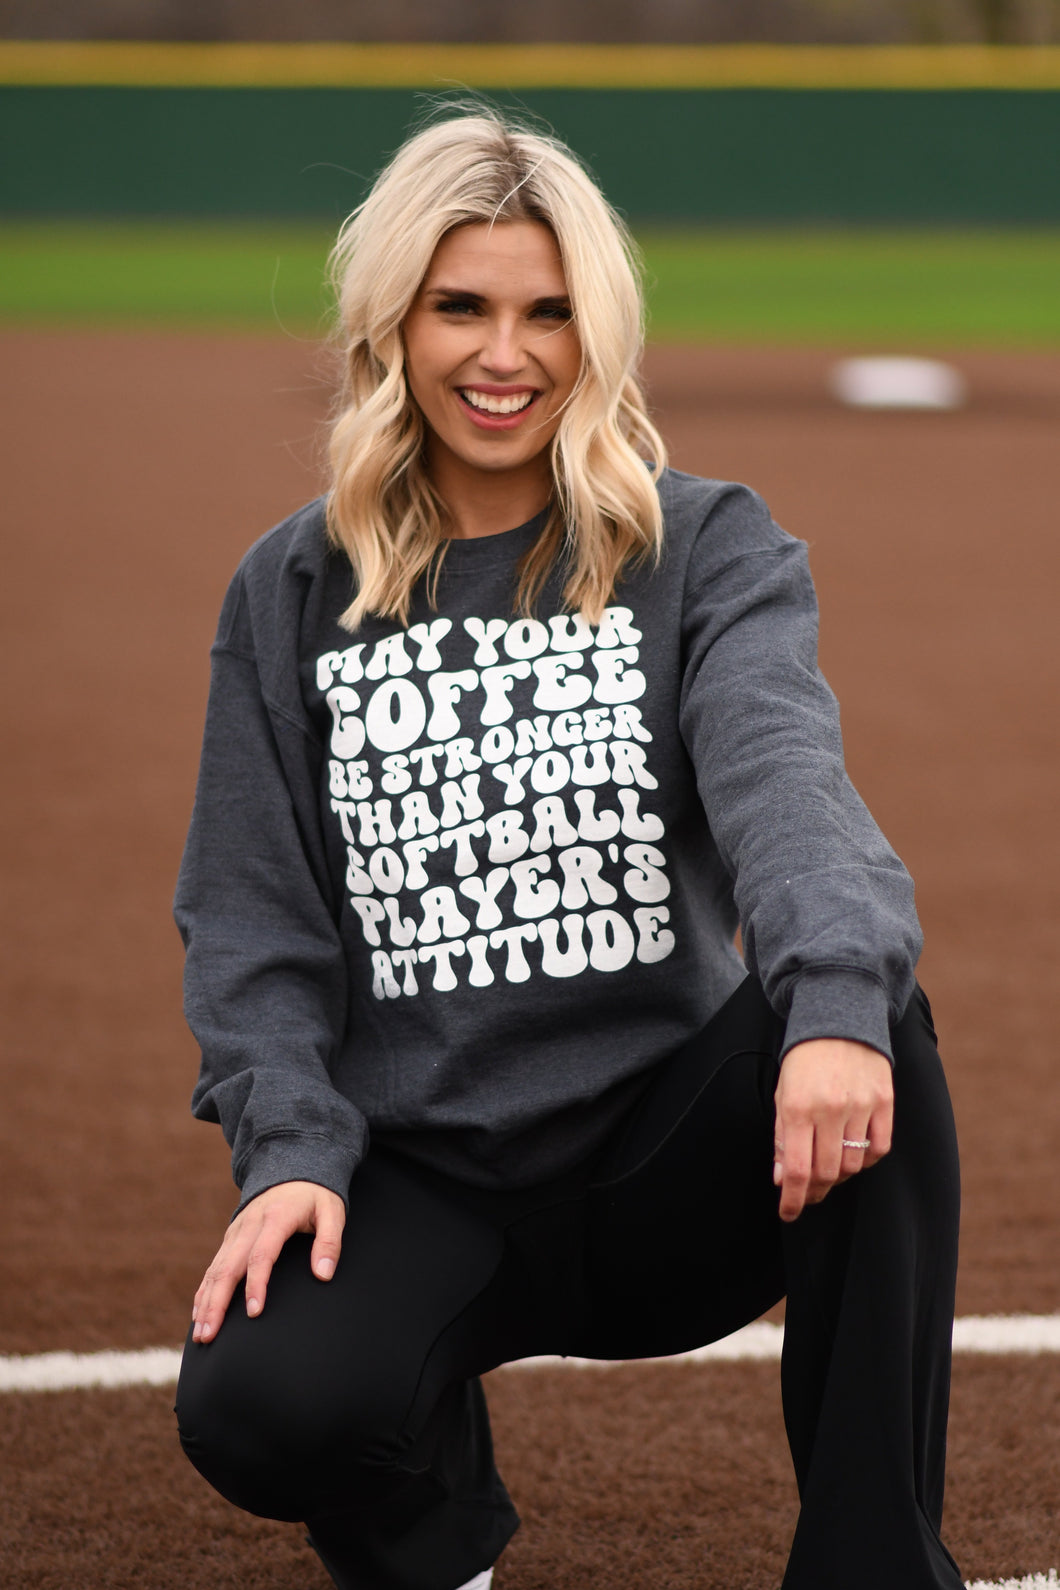 May Your Coffee Be Stronger Than Your Softball Players Attitude TEE/SWEATSHIRT